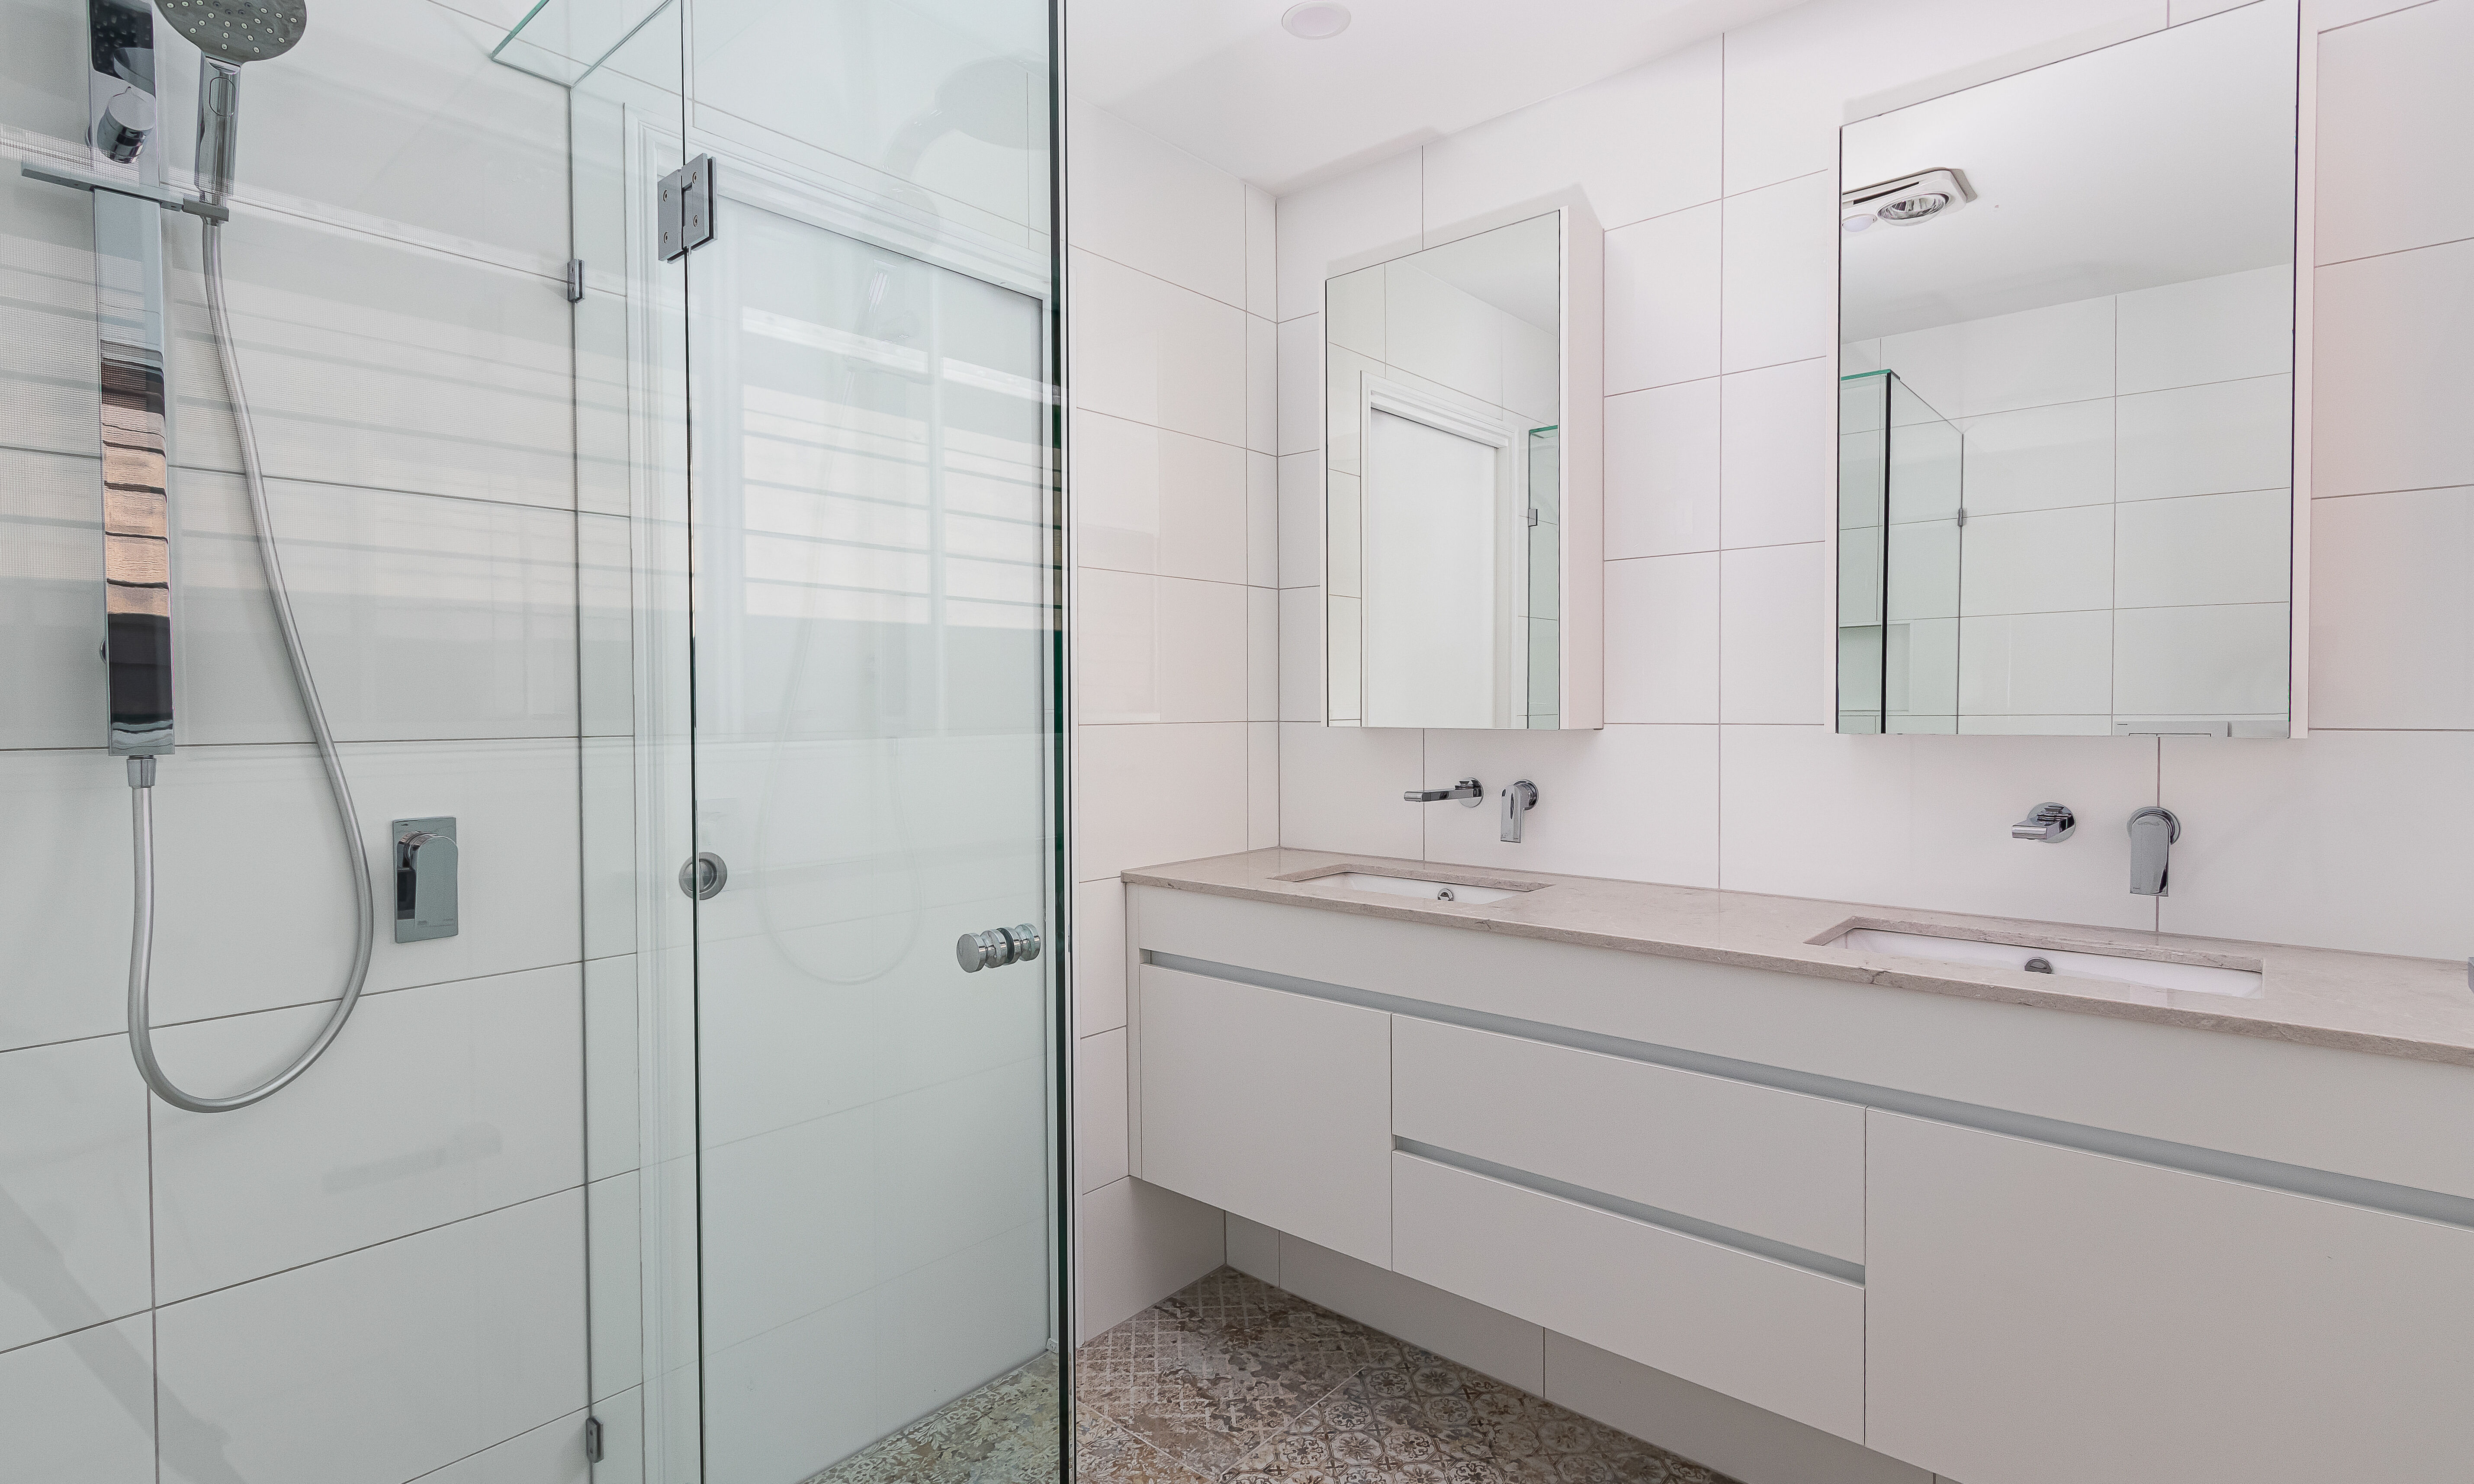 Ensuite with floating vanity, mirrored shaving cabinets and fixed glass shower screen